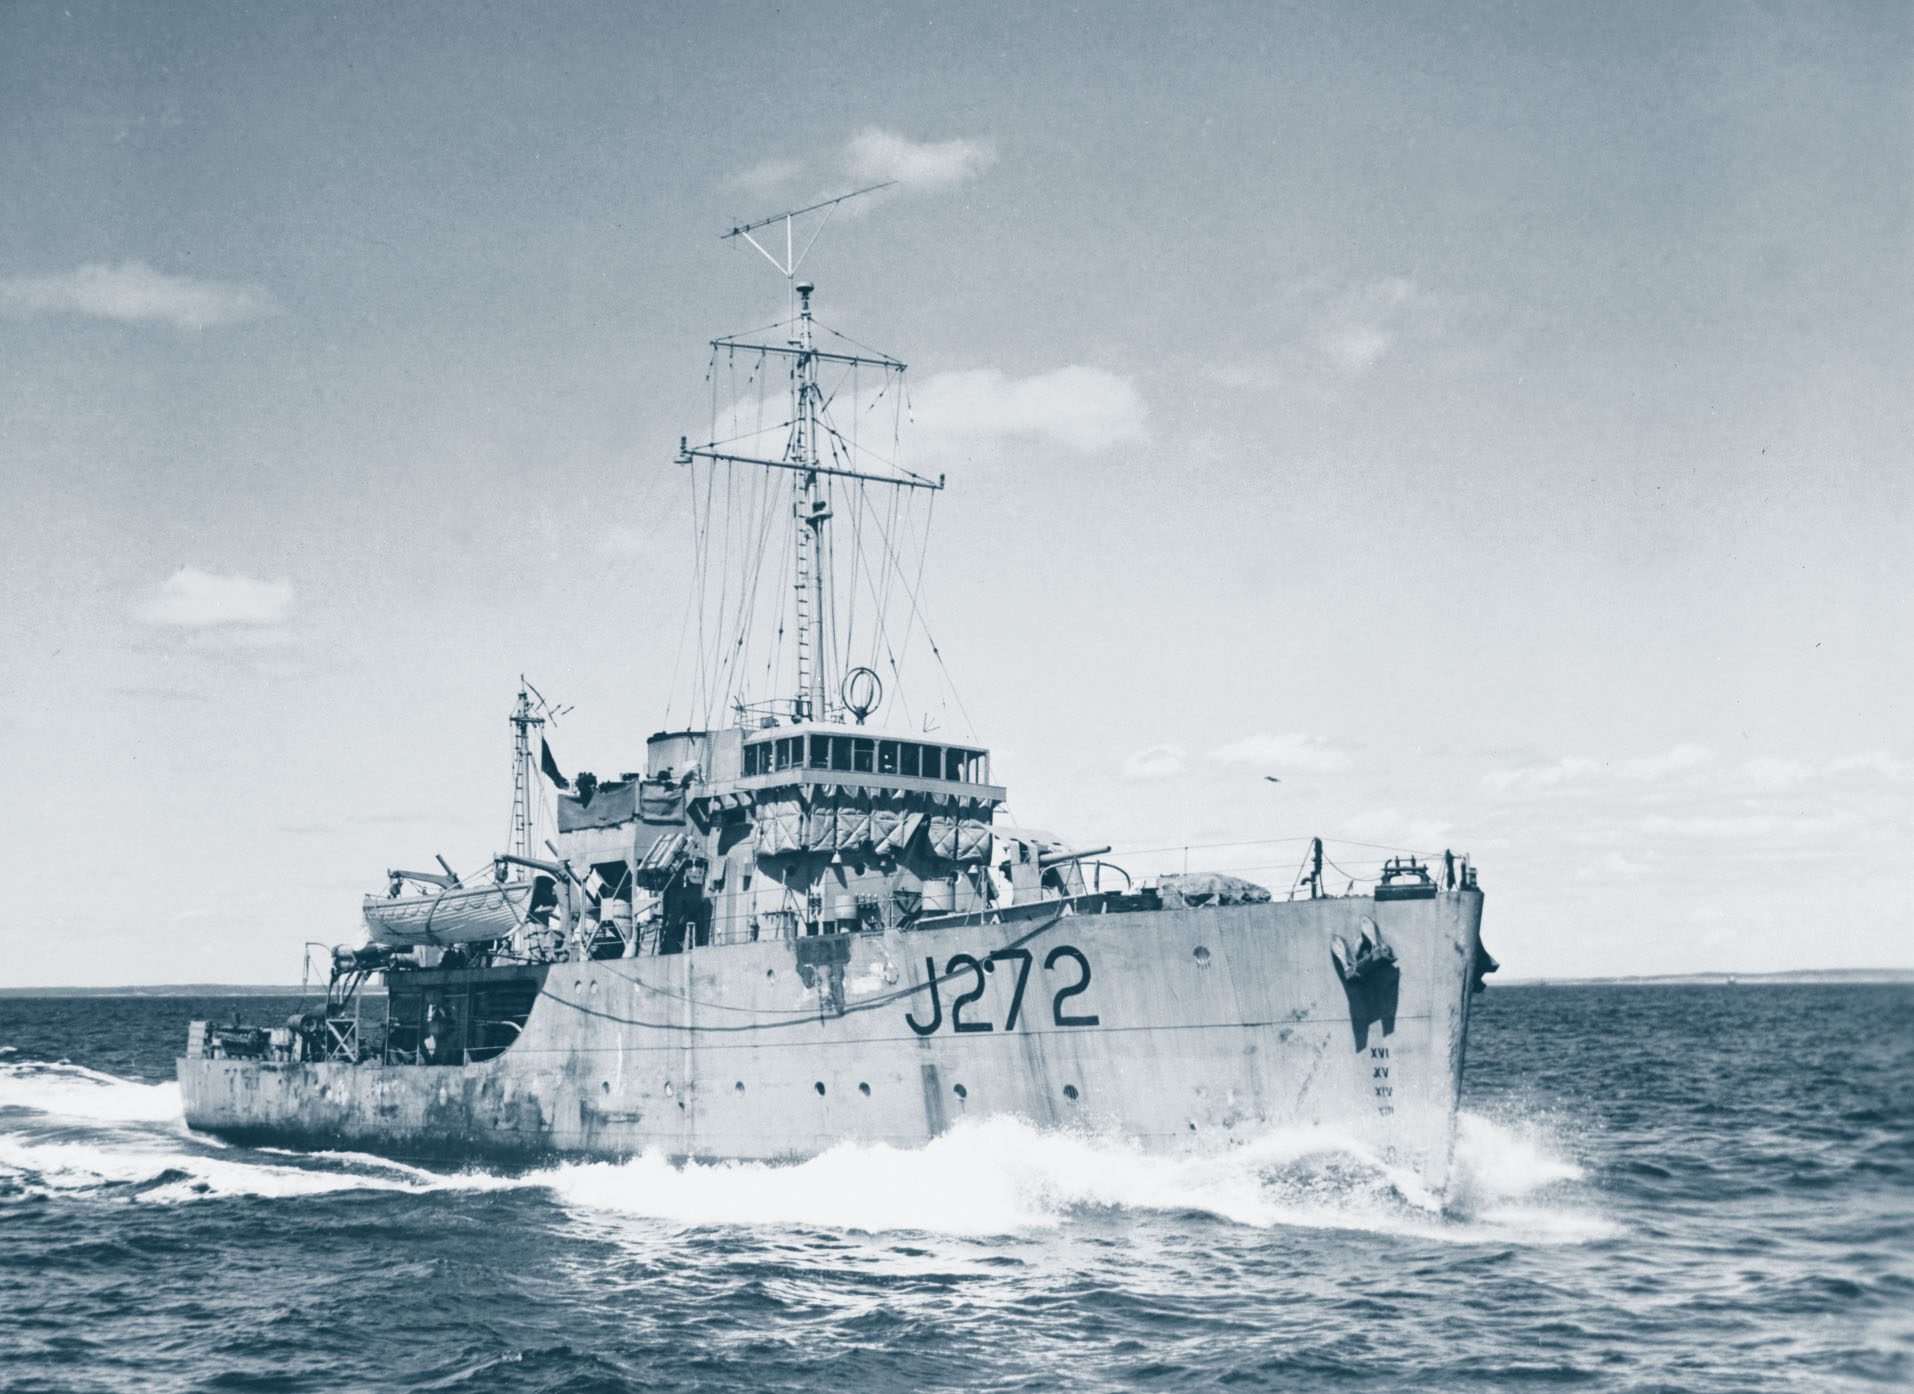 HMCS Esquimalt (J 272) Minesweeper of the Bangor class NavyThe Royal Canadian Navy Type Minesweeper Class Bangor Pennant J 272 Built by Marine Industries Ltd. (Sorel, Quebec, Canada) Ordered Laid down 20 Dec 1940 Launched 8 Aug 1941 Commissioned 26 Oct 1942 Lost 16 Apr 1945 Loss position 44.28N, 63.10W (See a map) History HMCS Escquimalt (Lt. Robert Cunningham MacMillan, DSC and Bar, RCNVR) was torpedoed and sunk on 16 April 1945 by U-190, five miles off Chebucto Head, near Halifax, Canada in position 44º28'N, 63º10'W. 44 of the crew were lost with the ship and 26 of the crew survived the sinking. Hit by U-boat Sunk on 16 Apr 1945 by U-190 (Reith).